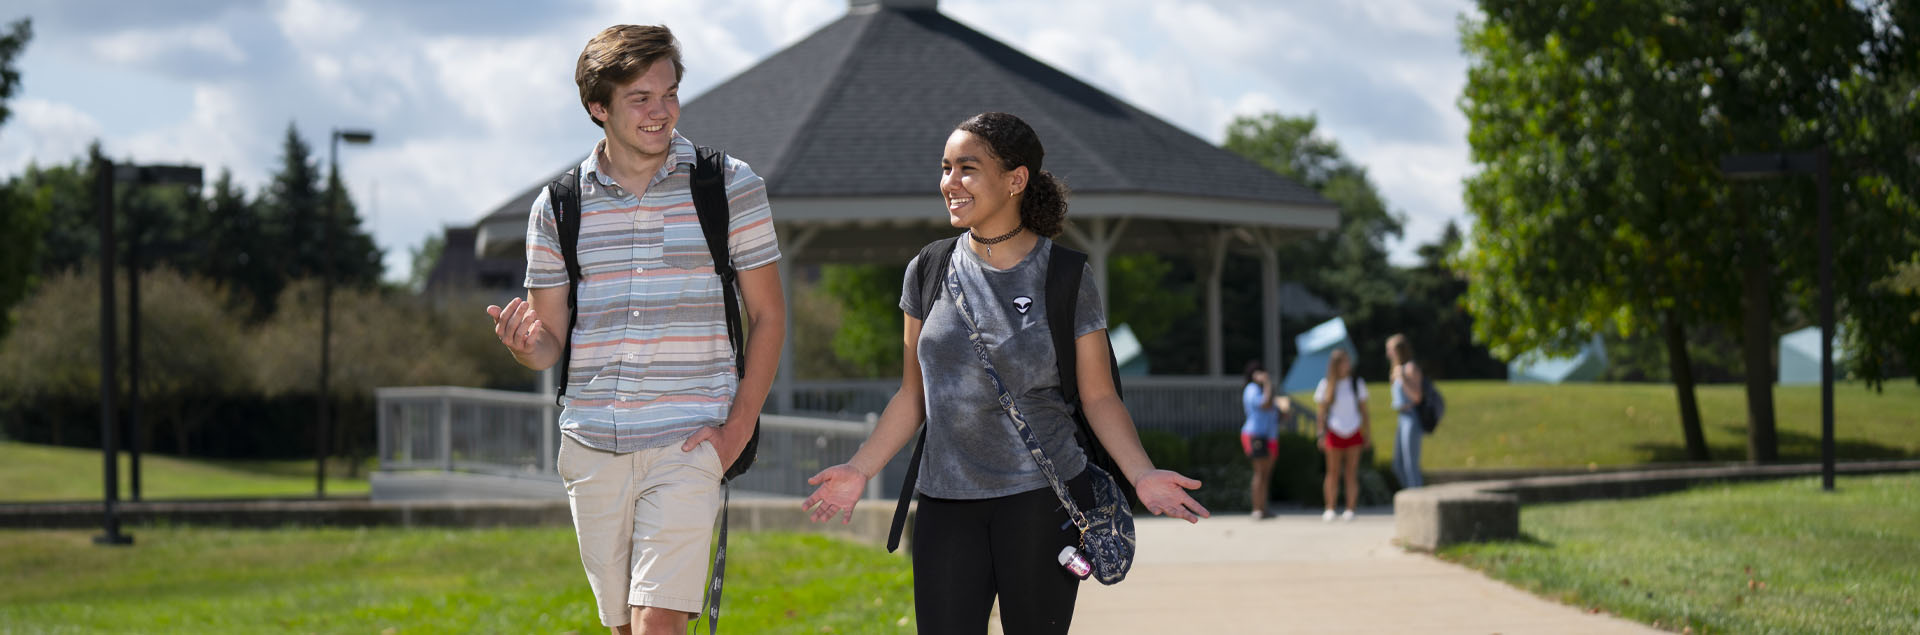 Registration for all admitted students now open for Fall 2022 